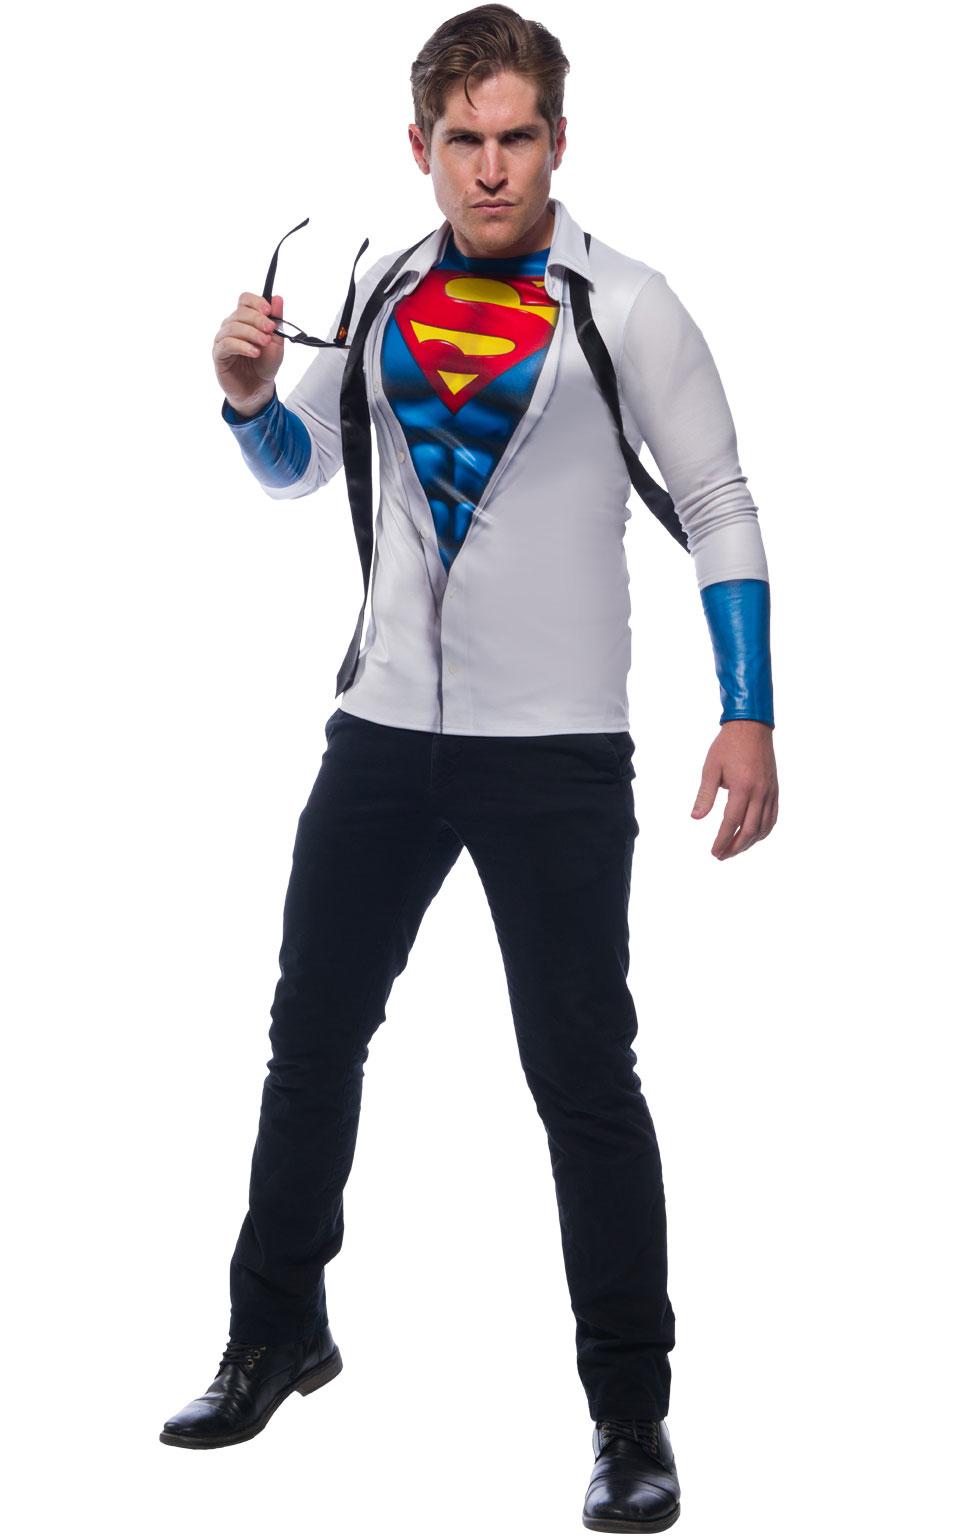 Adult Superman Photorealistic Costume Top by Rubies 821139 available here at Karnival Costumes online party shop